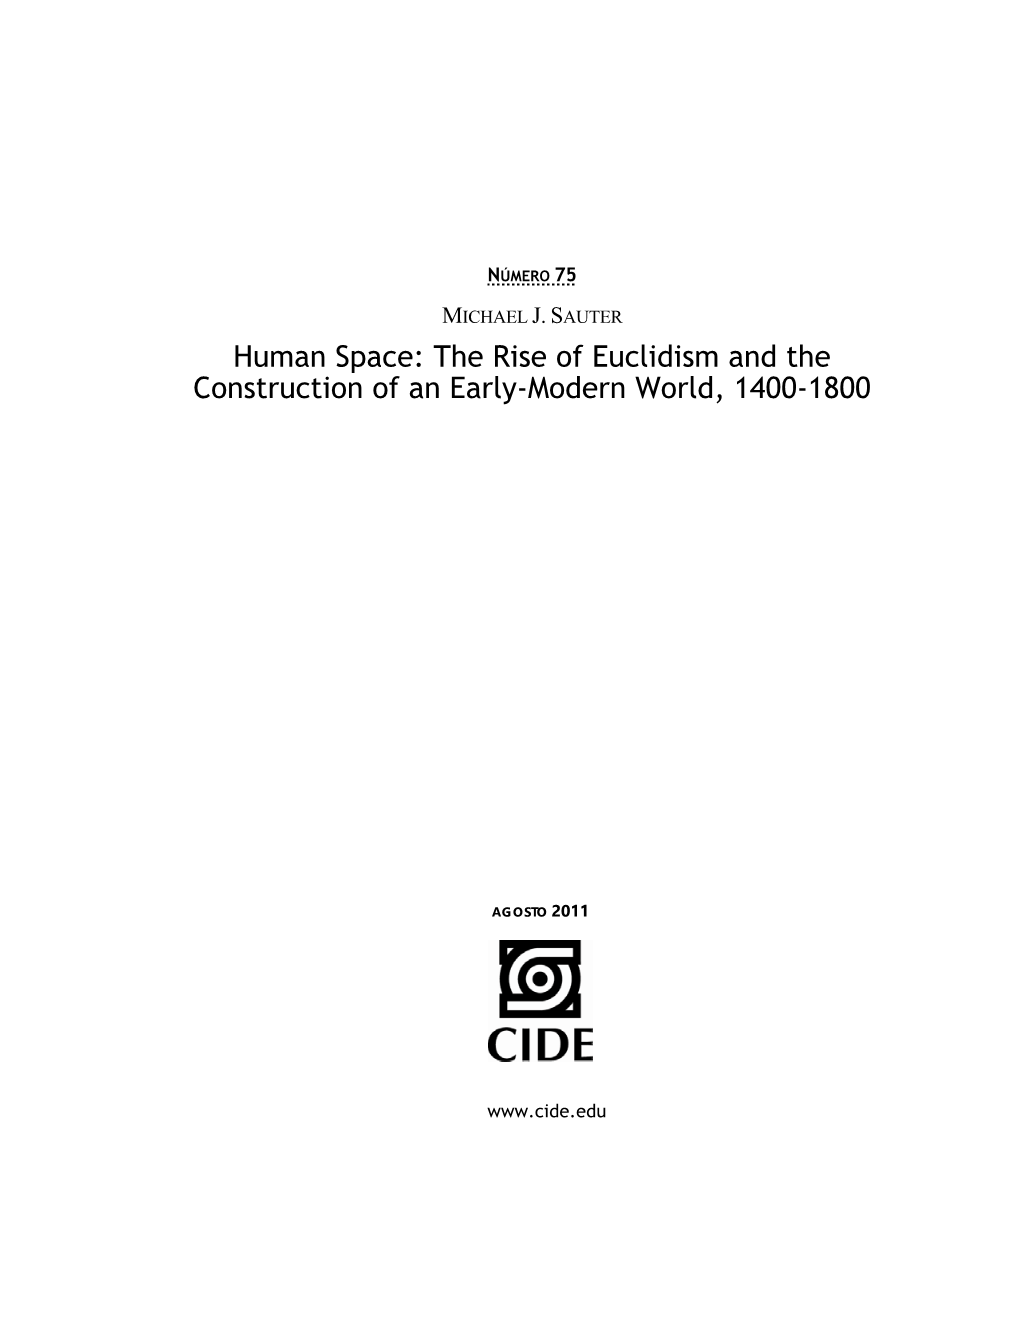 The Rise of Euclidism and the Construction of an Early-Modern World, 1400-1800